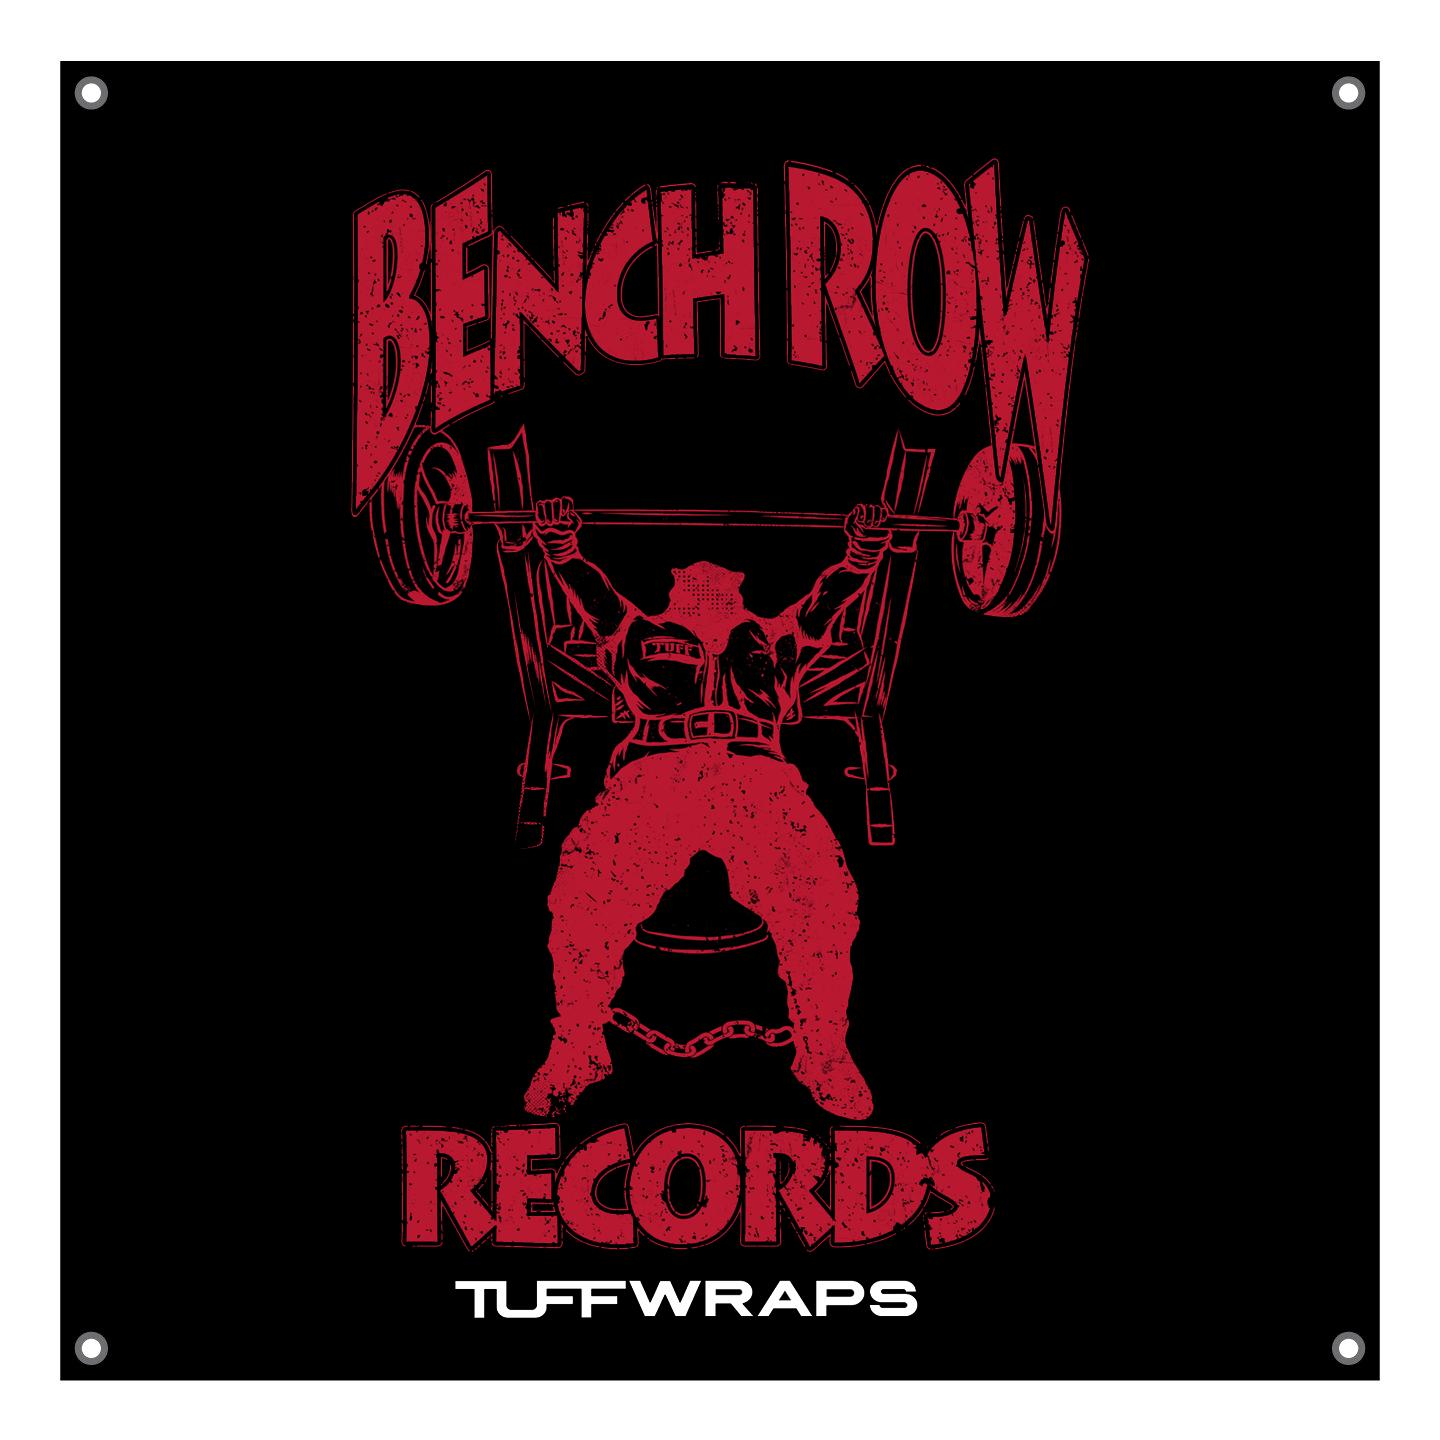 Bench Row Records 3x3 Wall Banner Banners